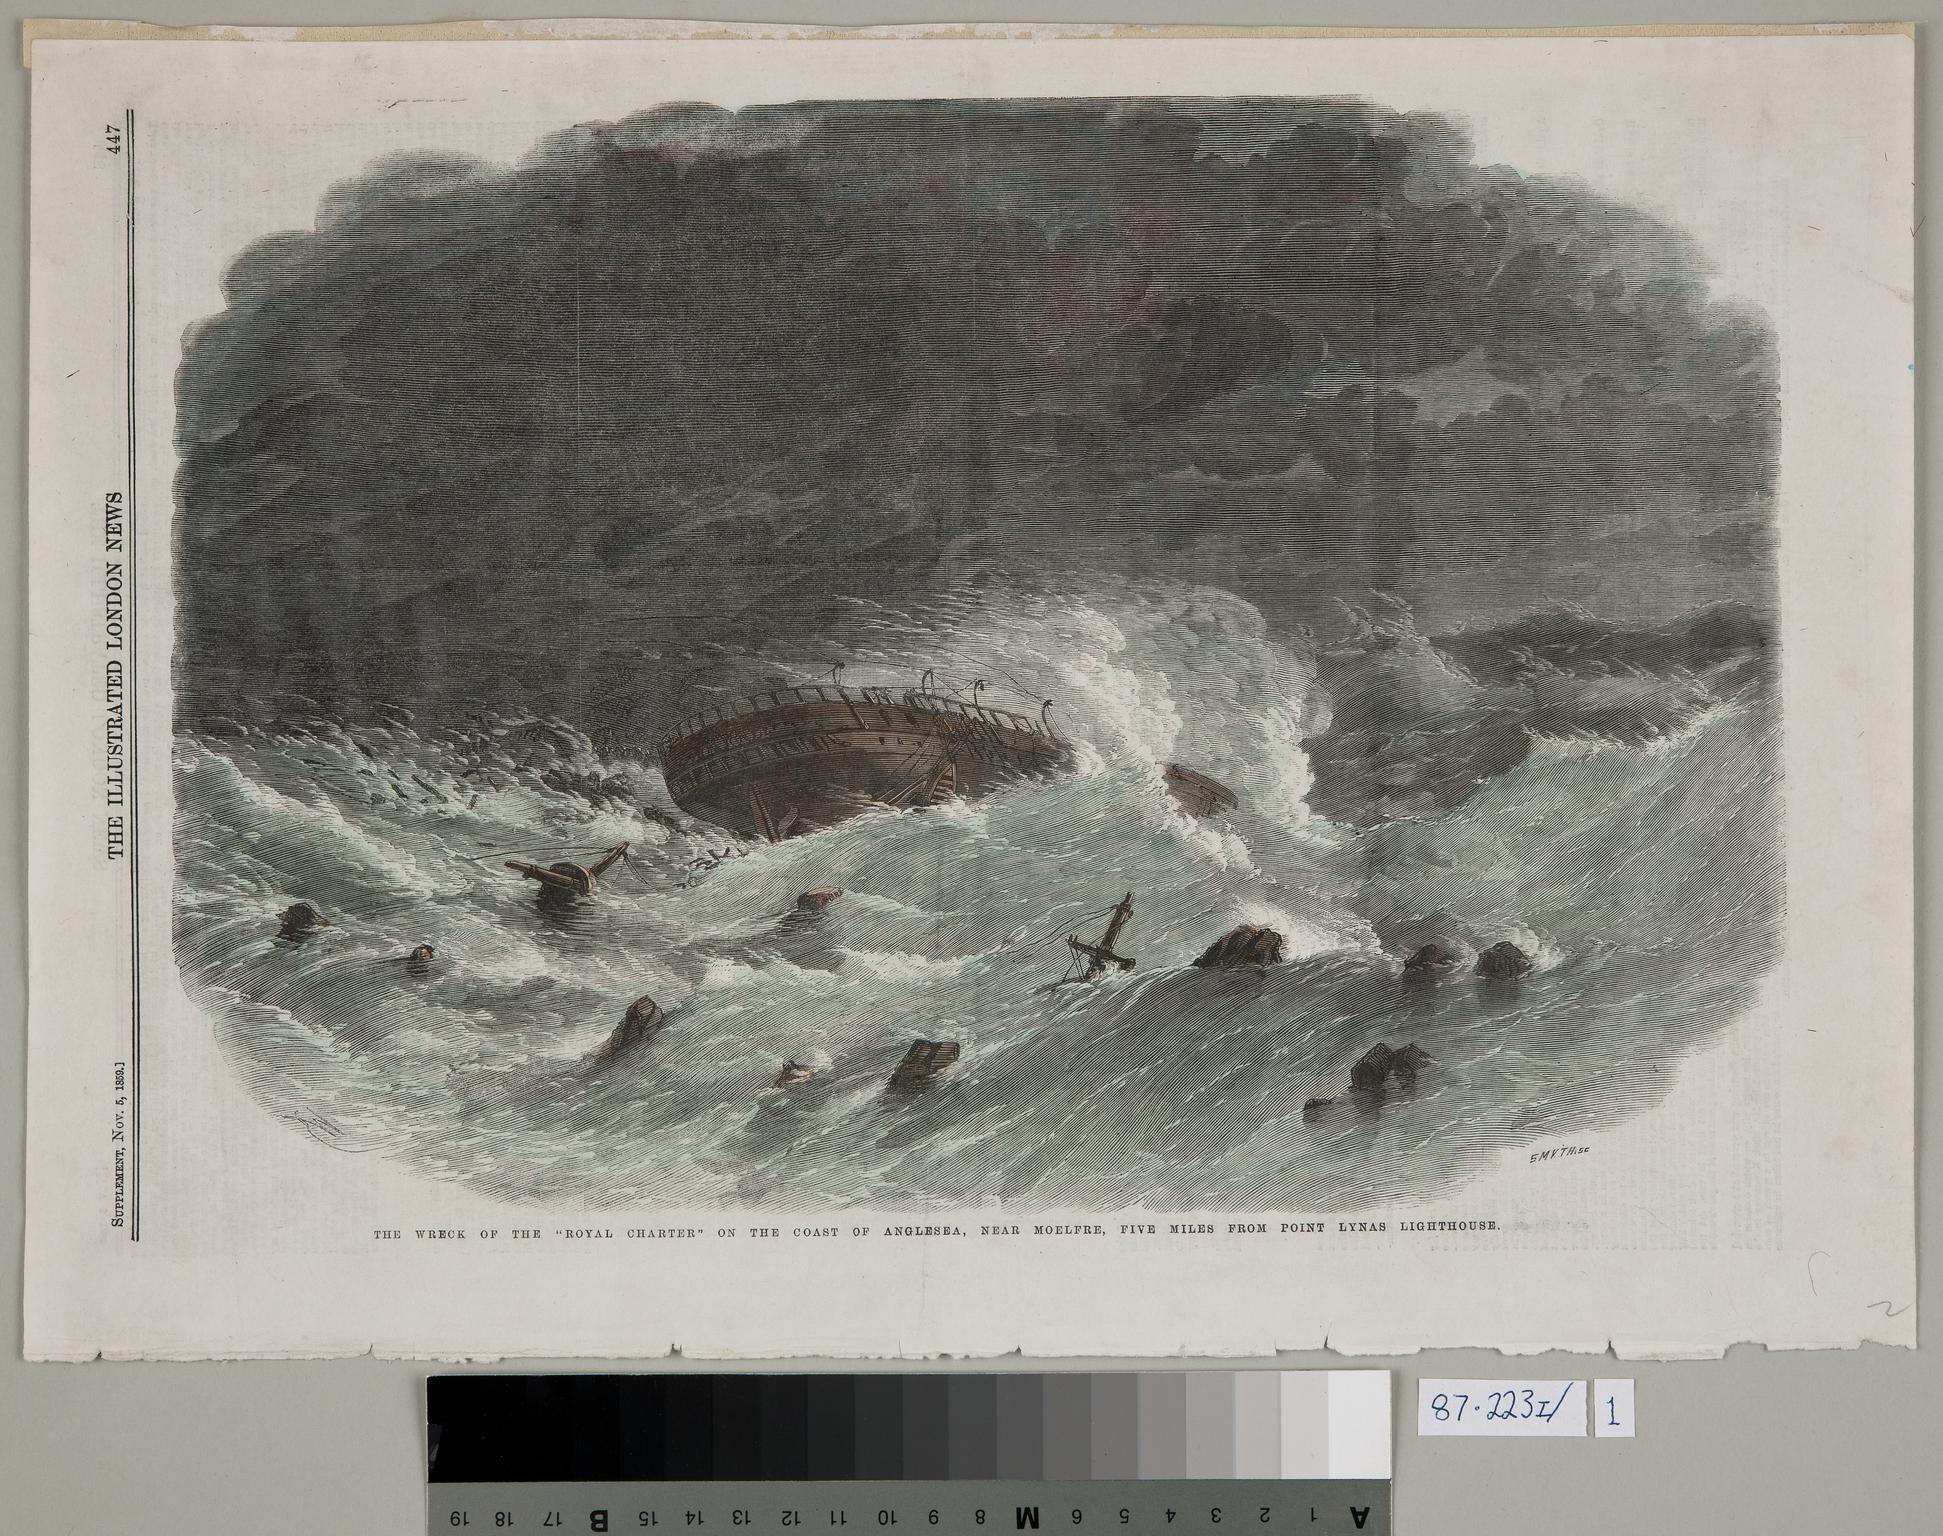 The Wreck of the ROYAL CHARTER on the Coast of Angelsey, Near Moelfre, Five Miles from Point Lynas Lighthouse (print)